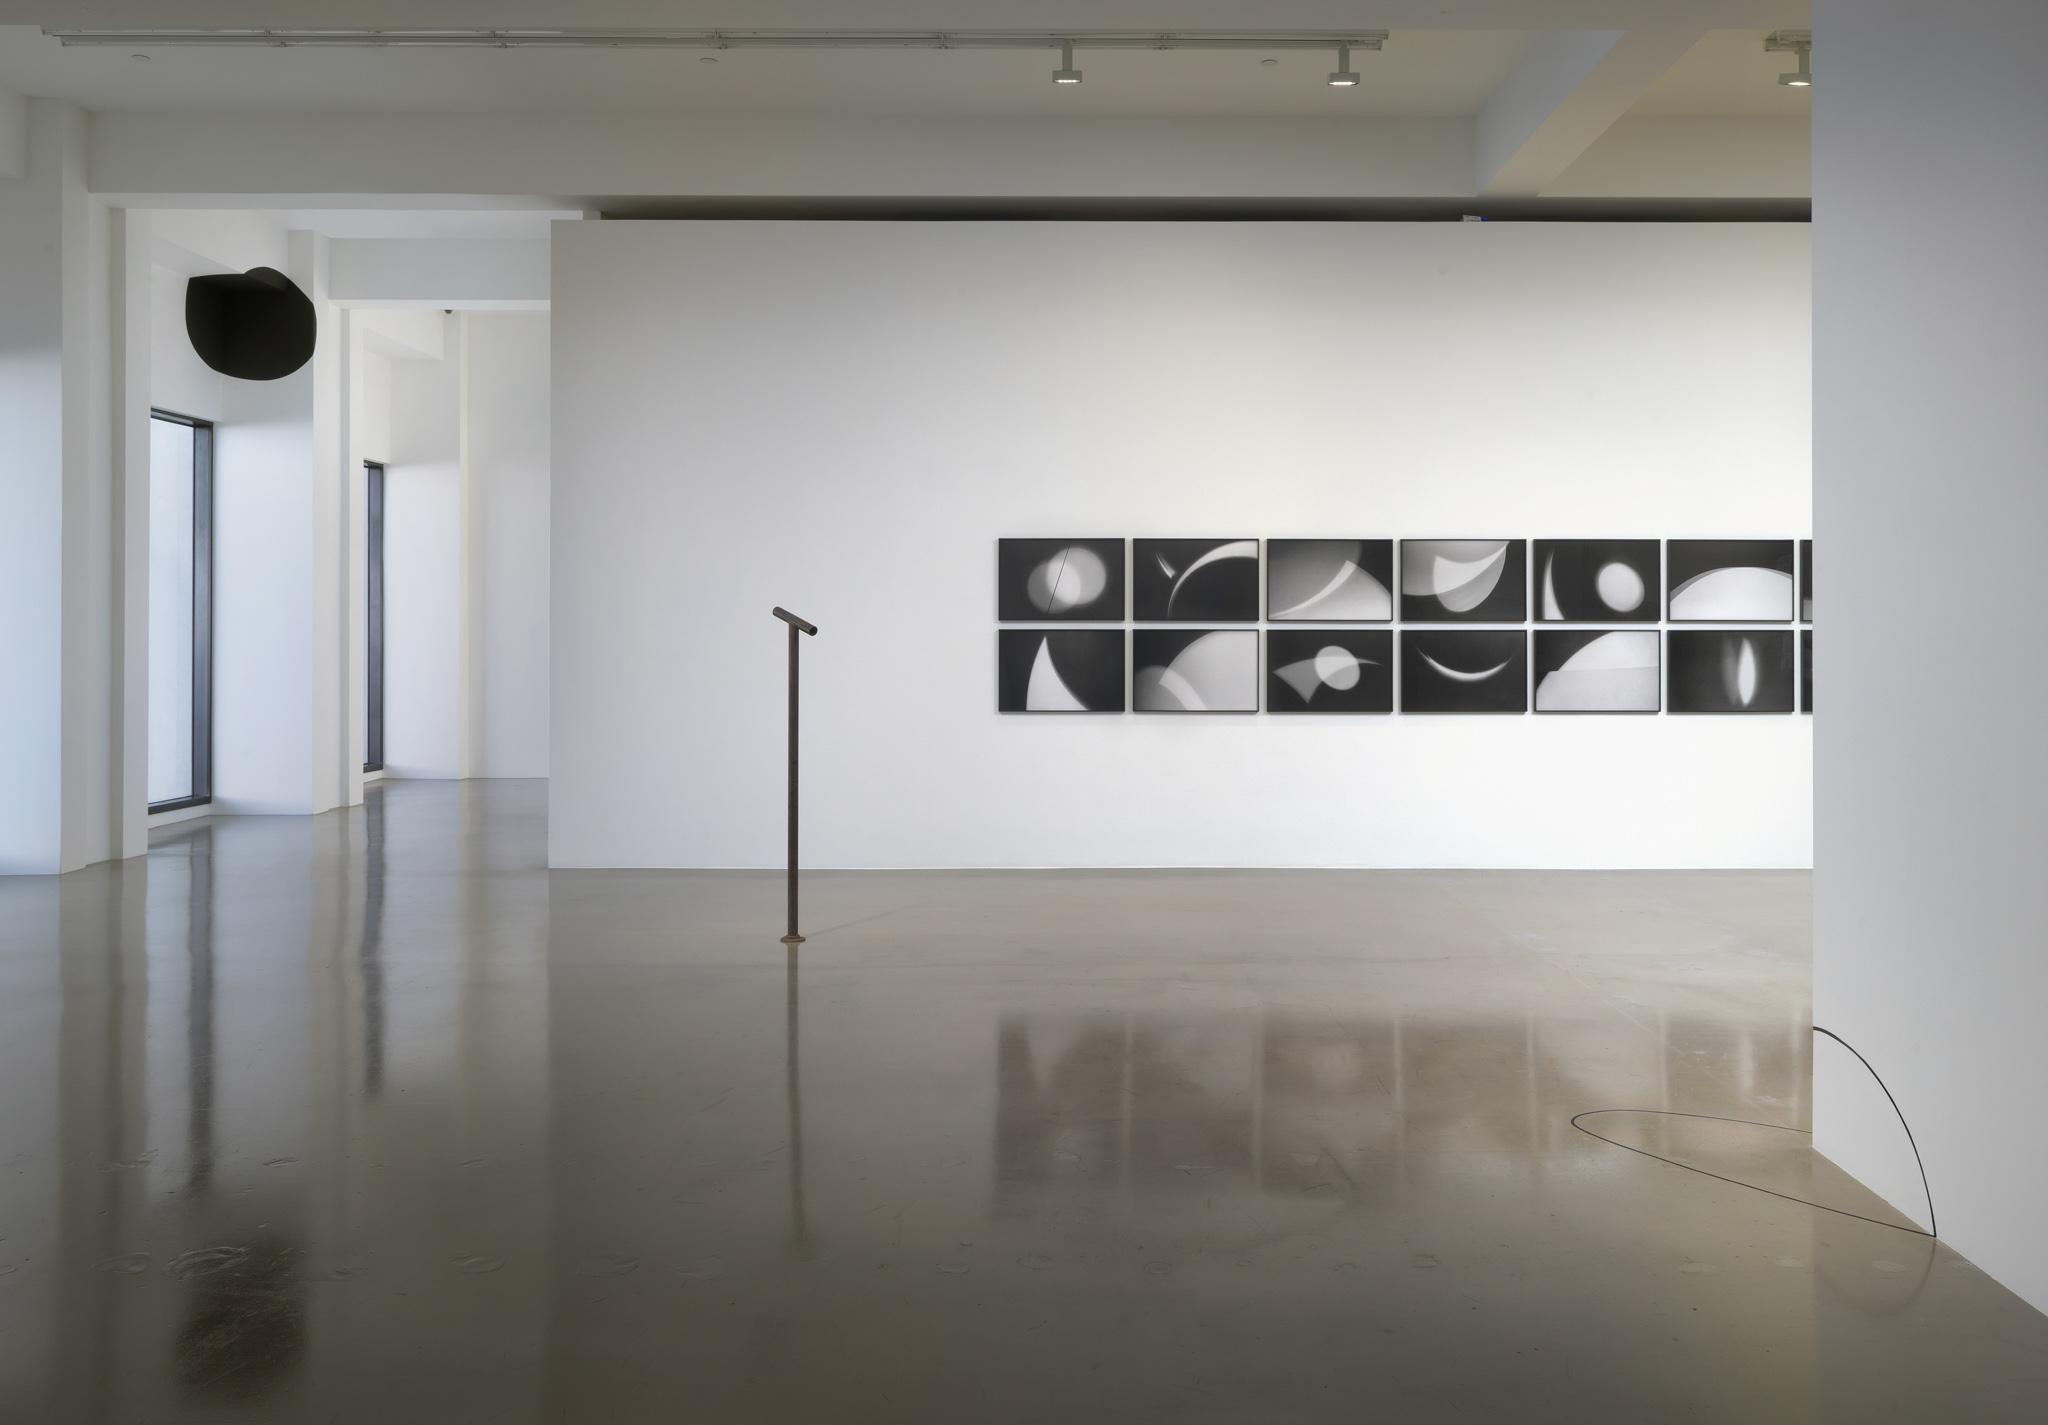 Installation view of a Locator and photographic work in Nancy Holt: Locating Perception